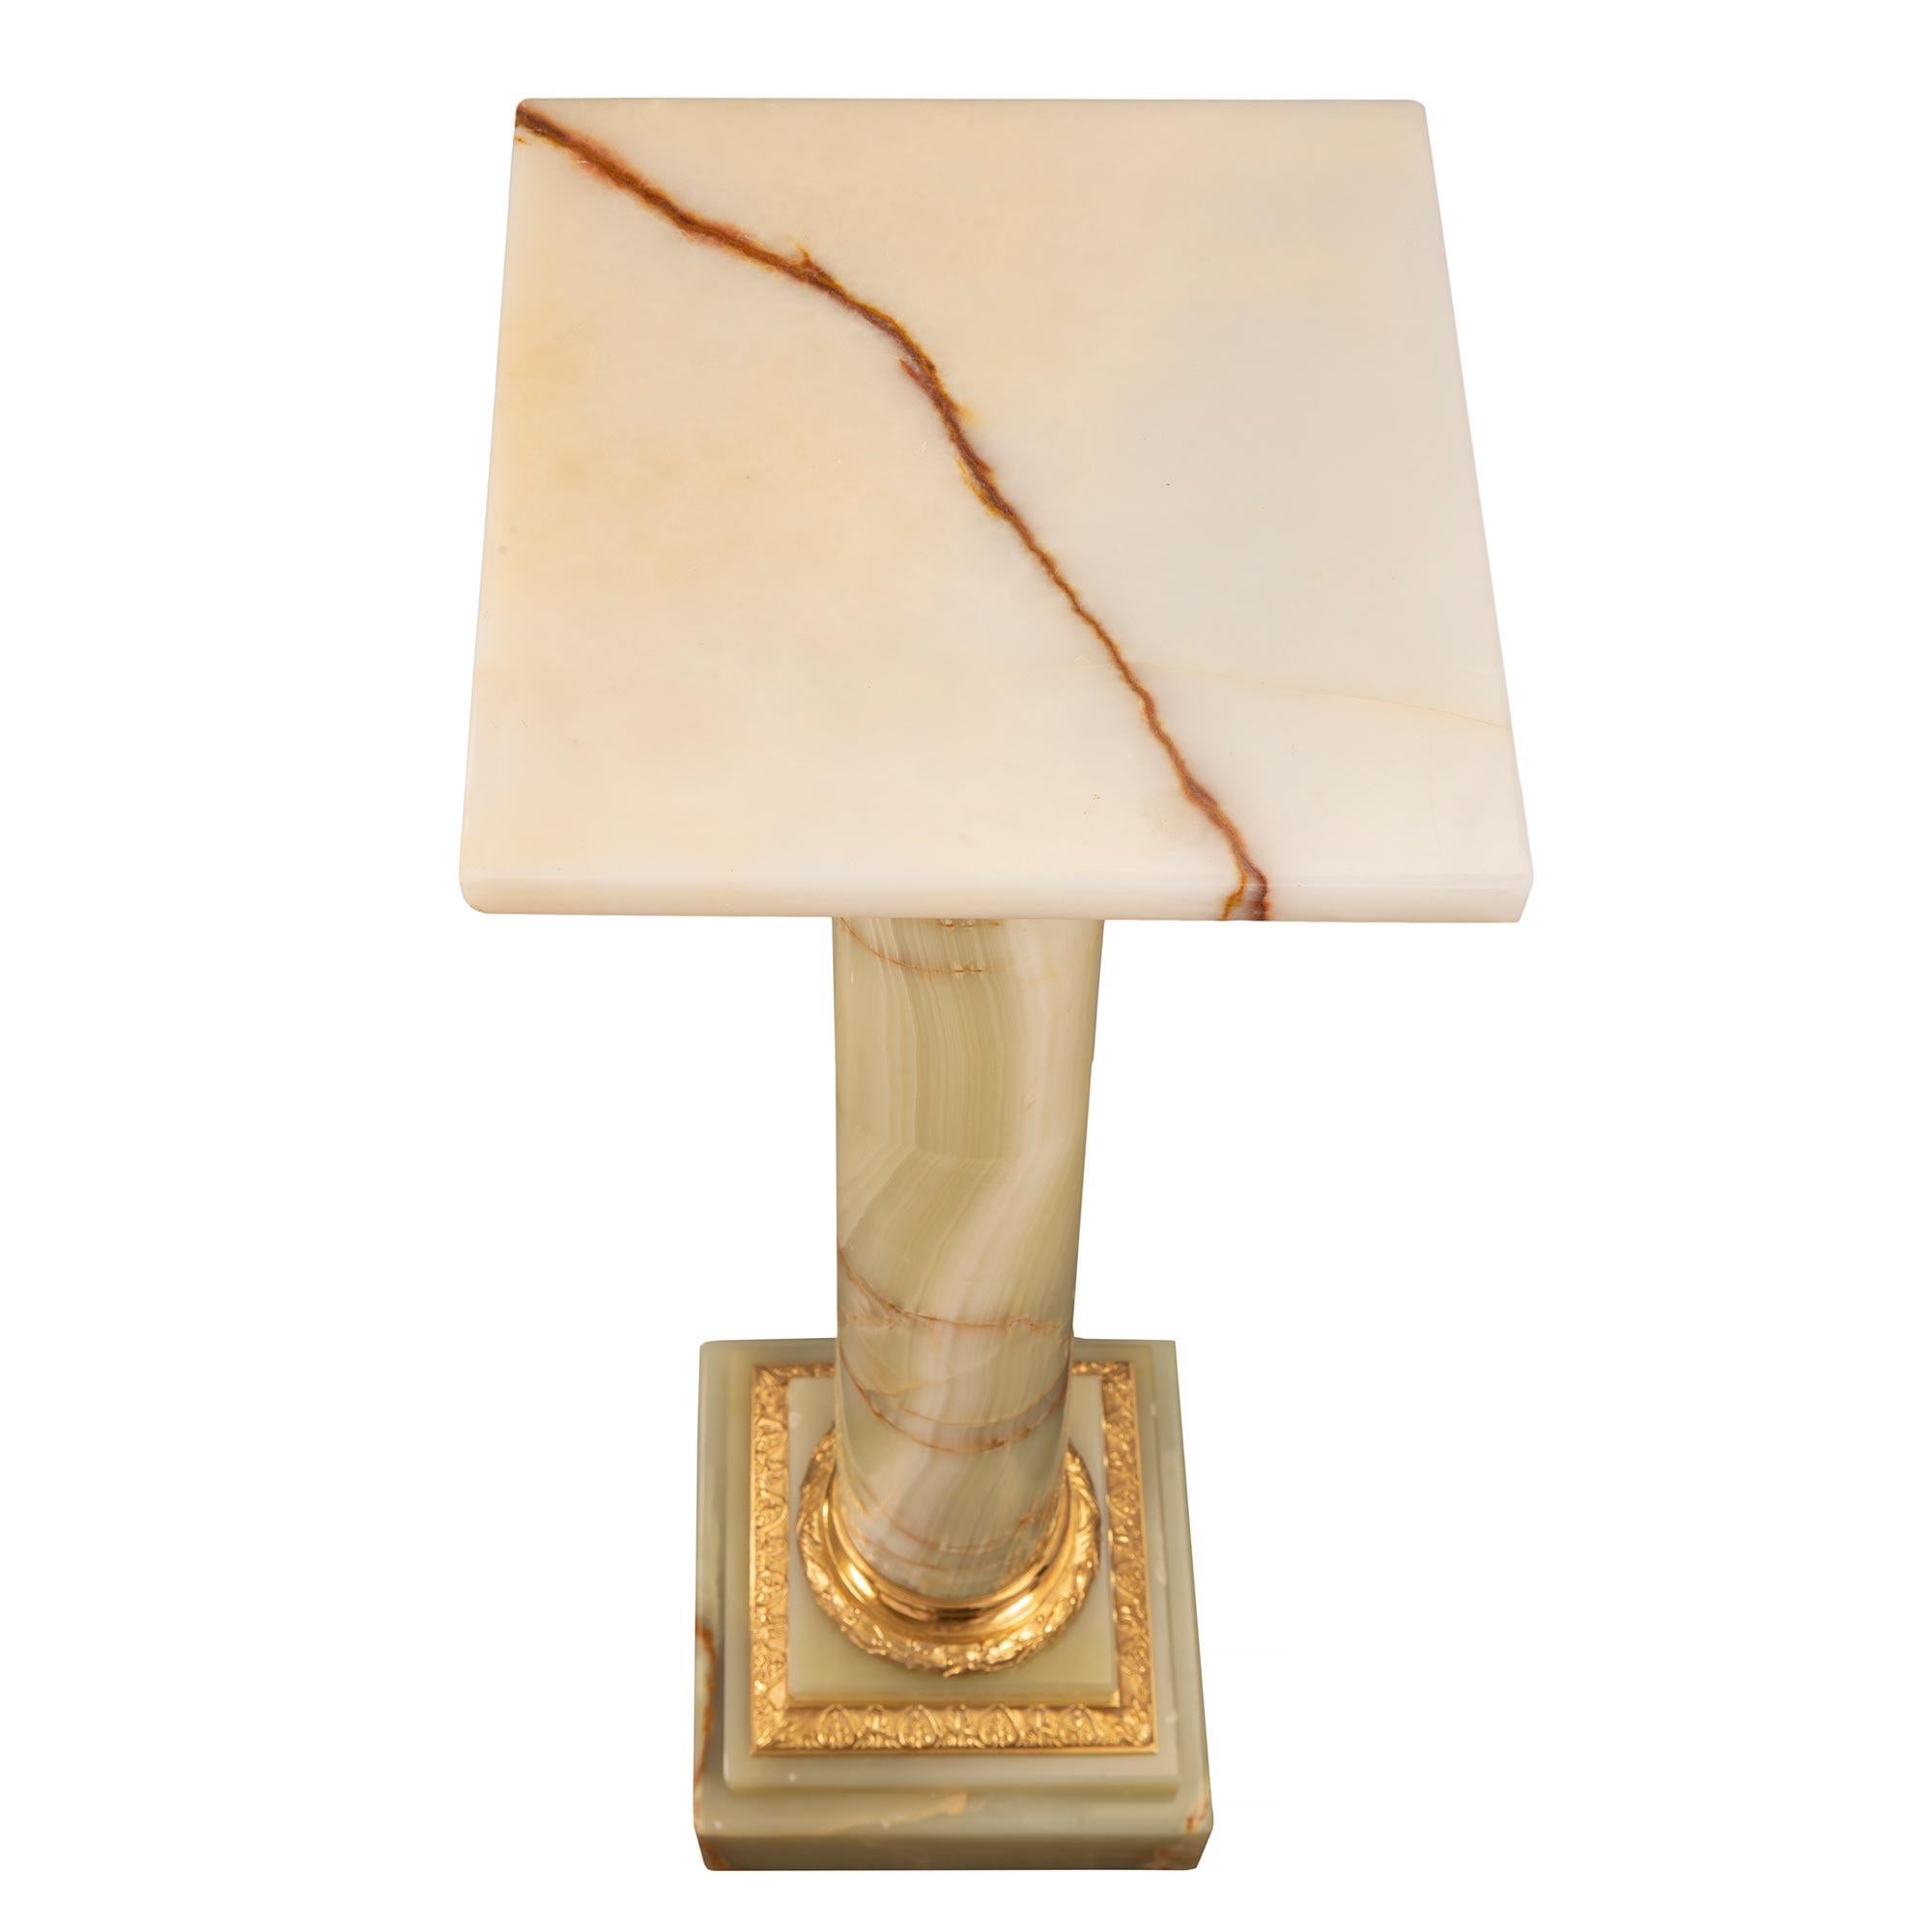 A striking and extremely elegant French 19th century Louis XVI st. onyx and ormolu pedestal column. The pedestal is raised by a square base with a stepped design and decorated with a fine wrap around foliate ormolu band. The ormolu socle displays a